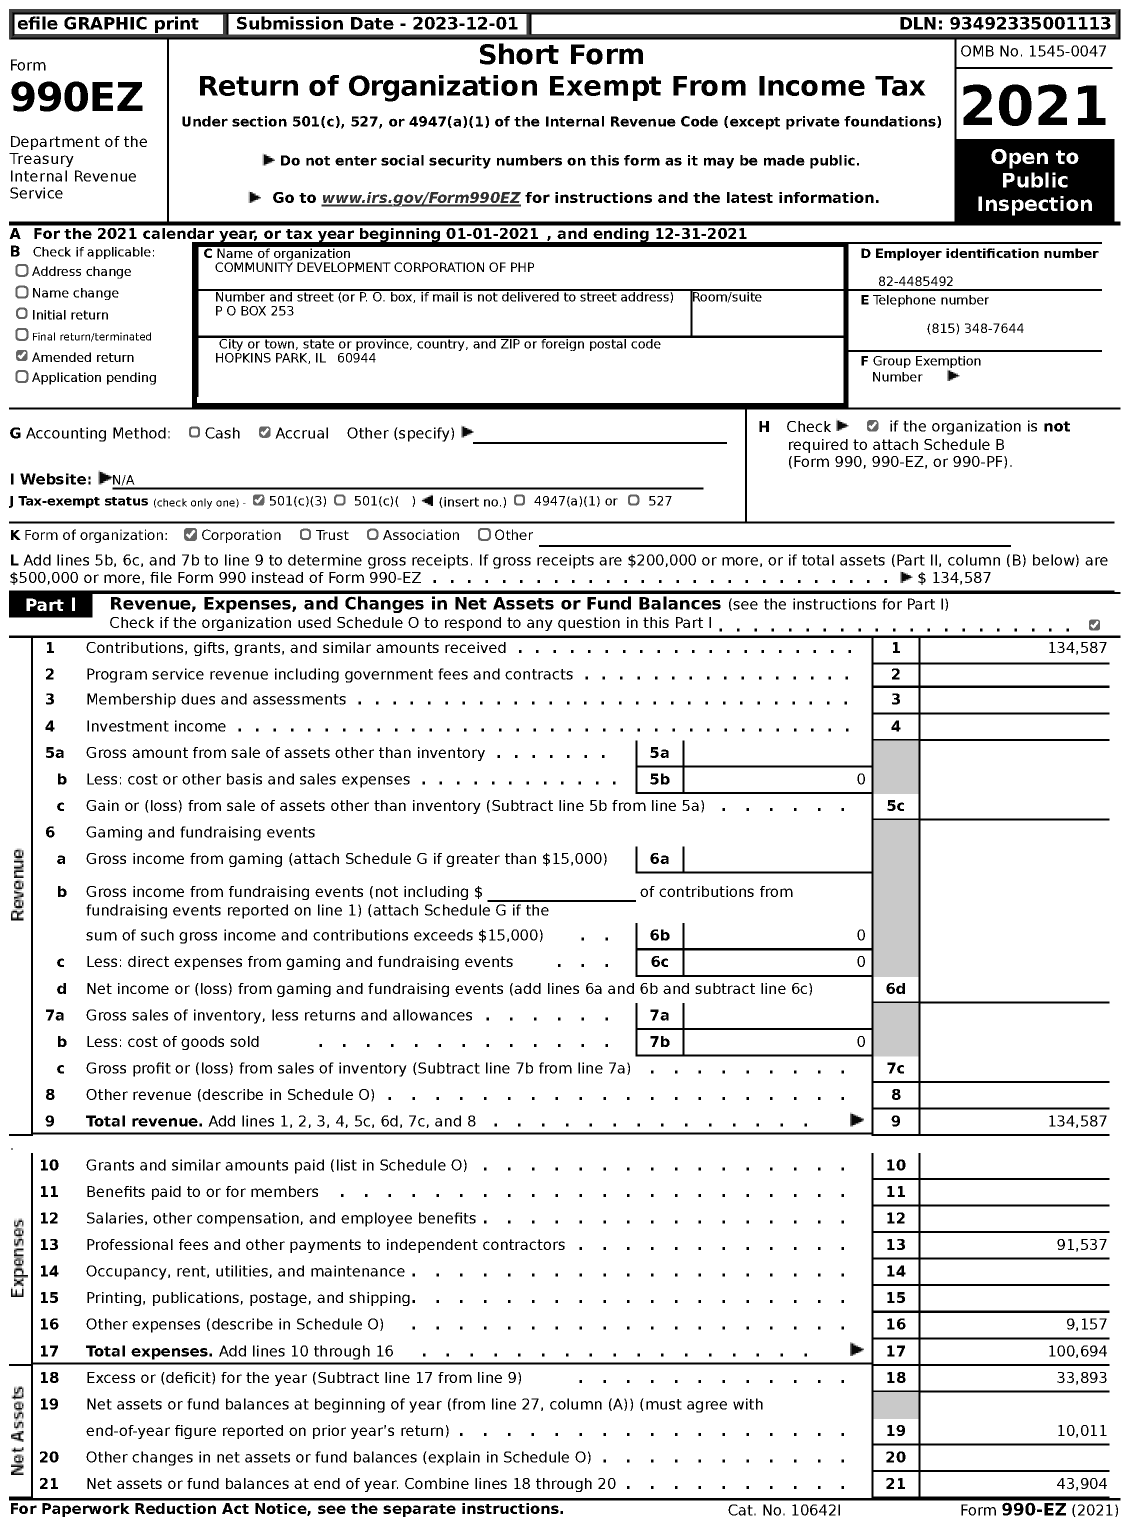 Image of first page of 2021 Form 990EZ for Community Development Corporation of PHP